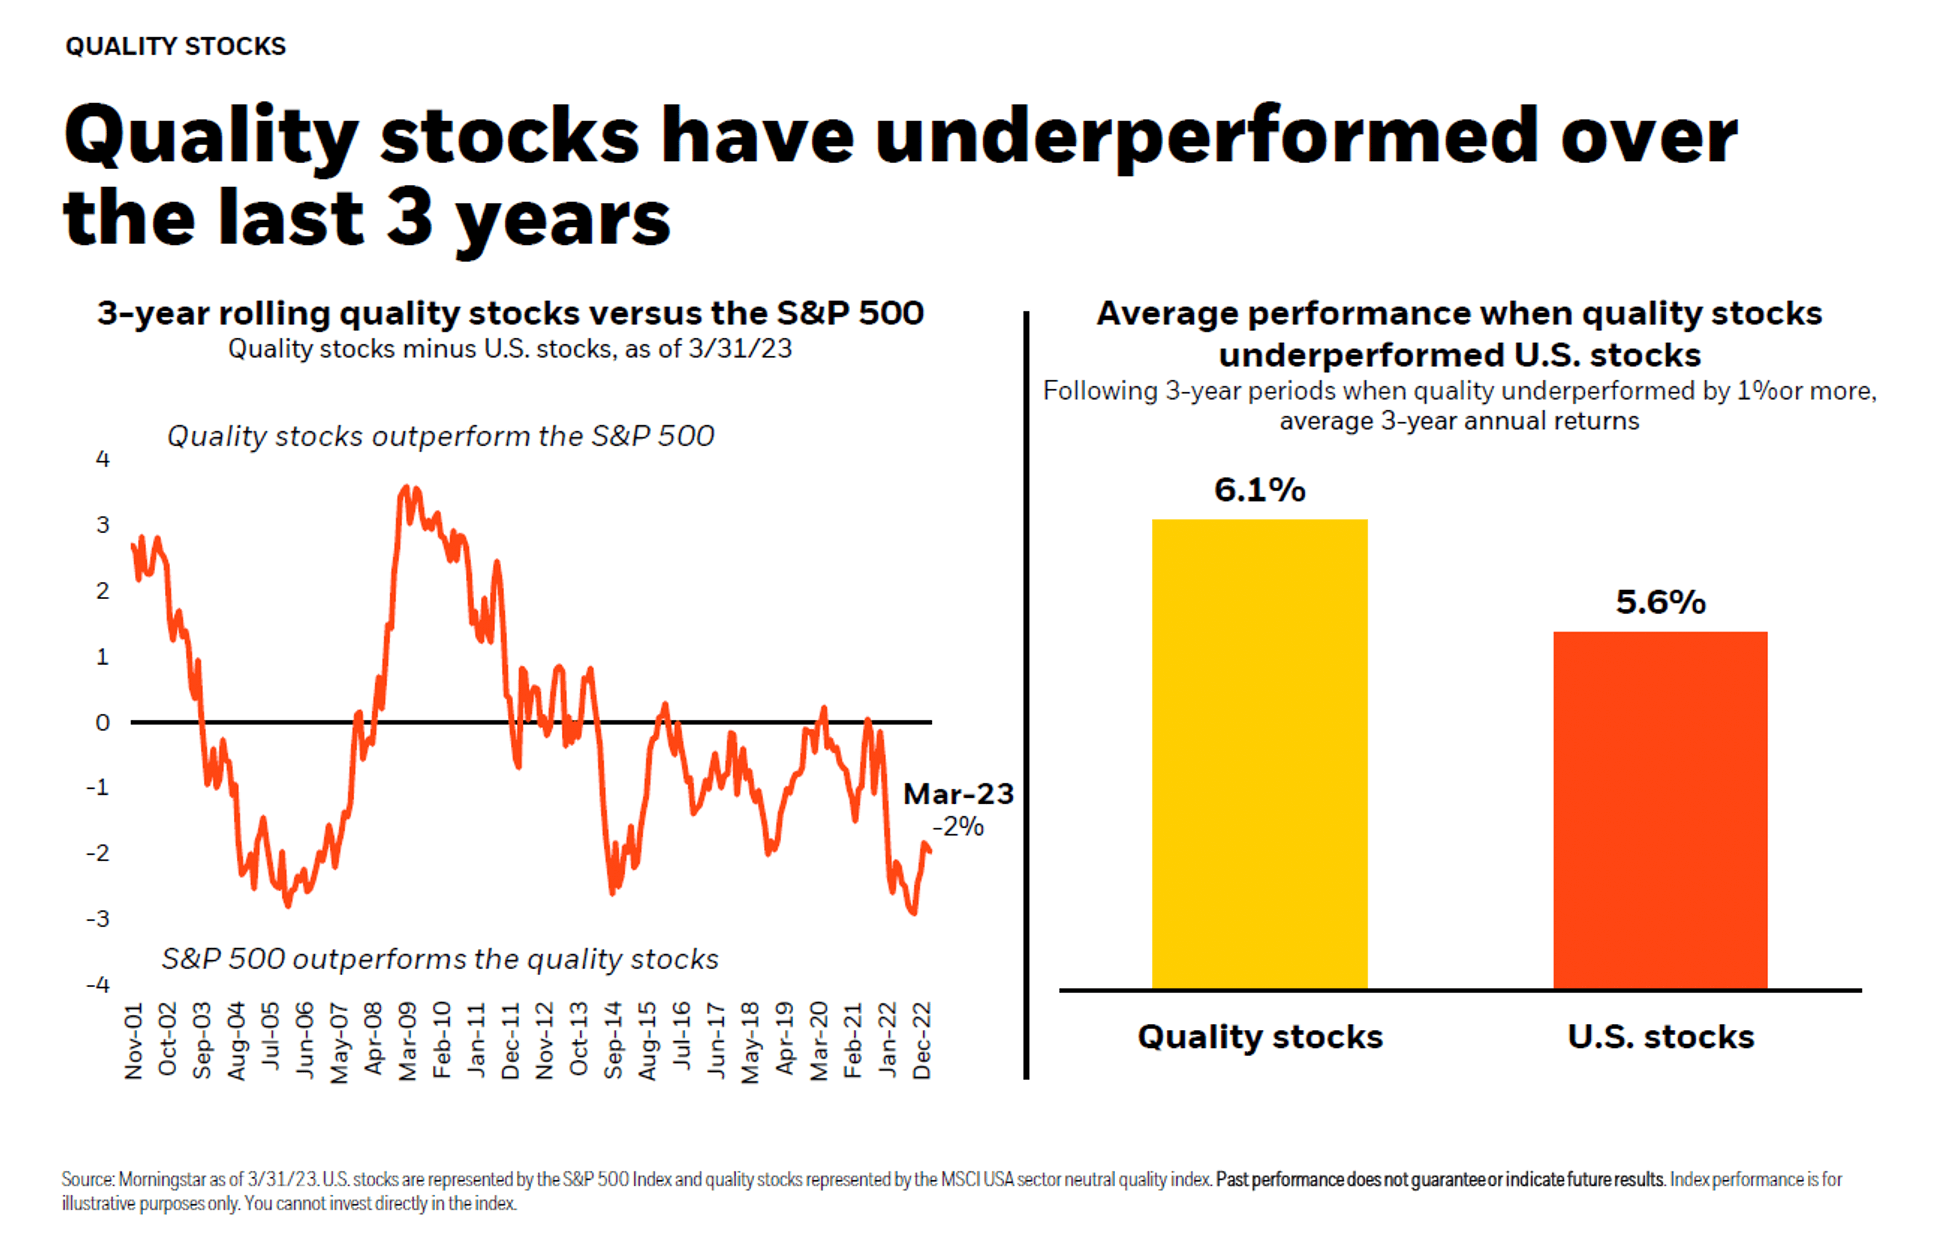 Quality stocks have underperformed over the last 3 years